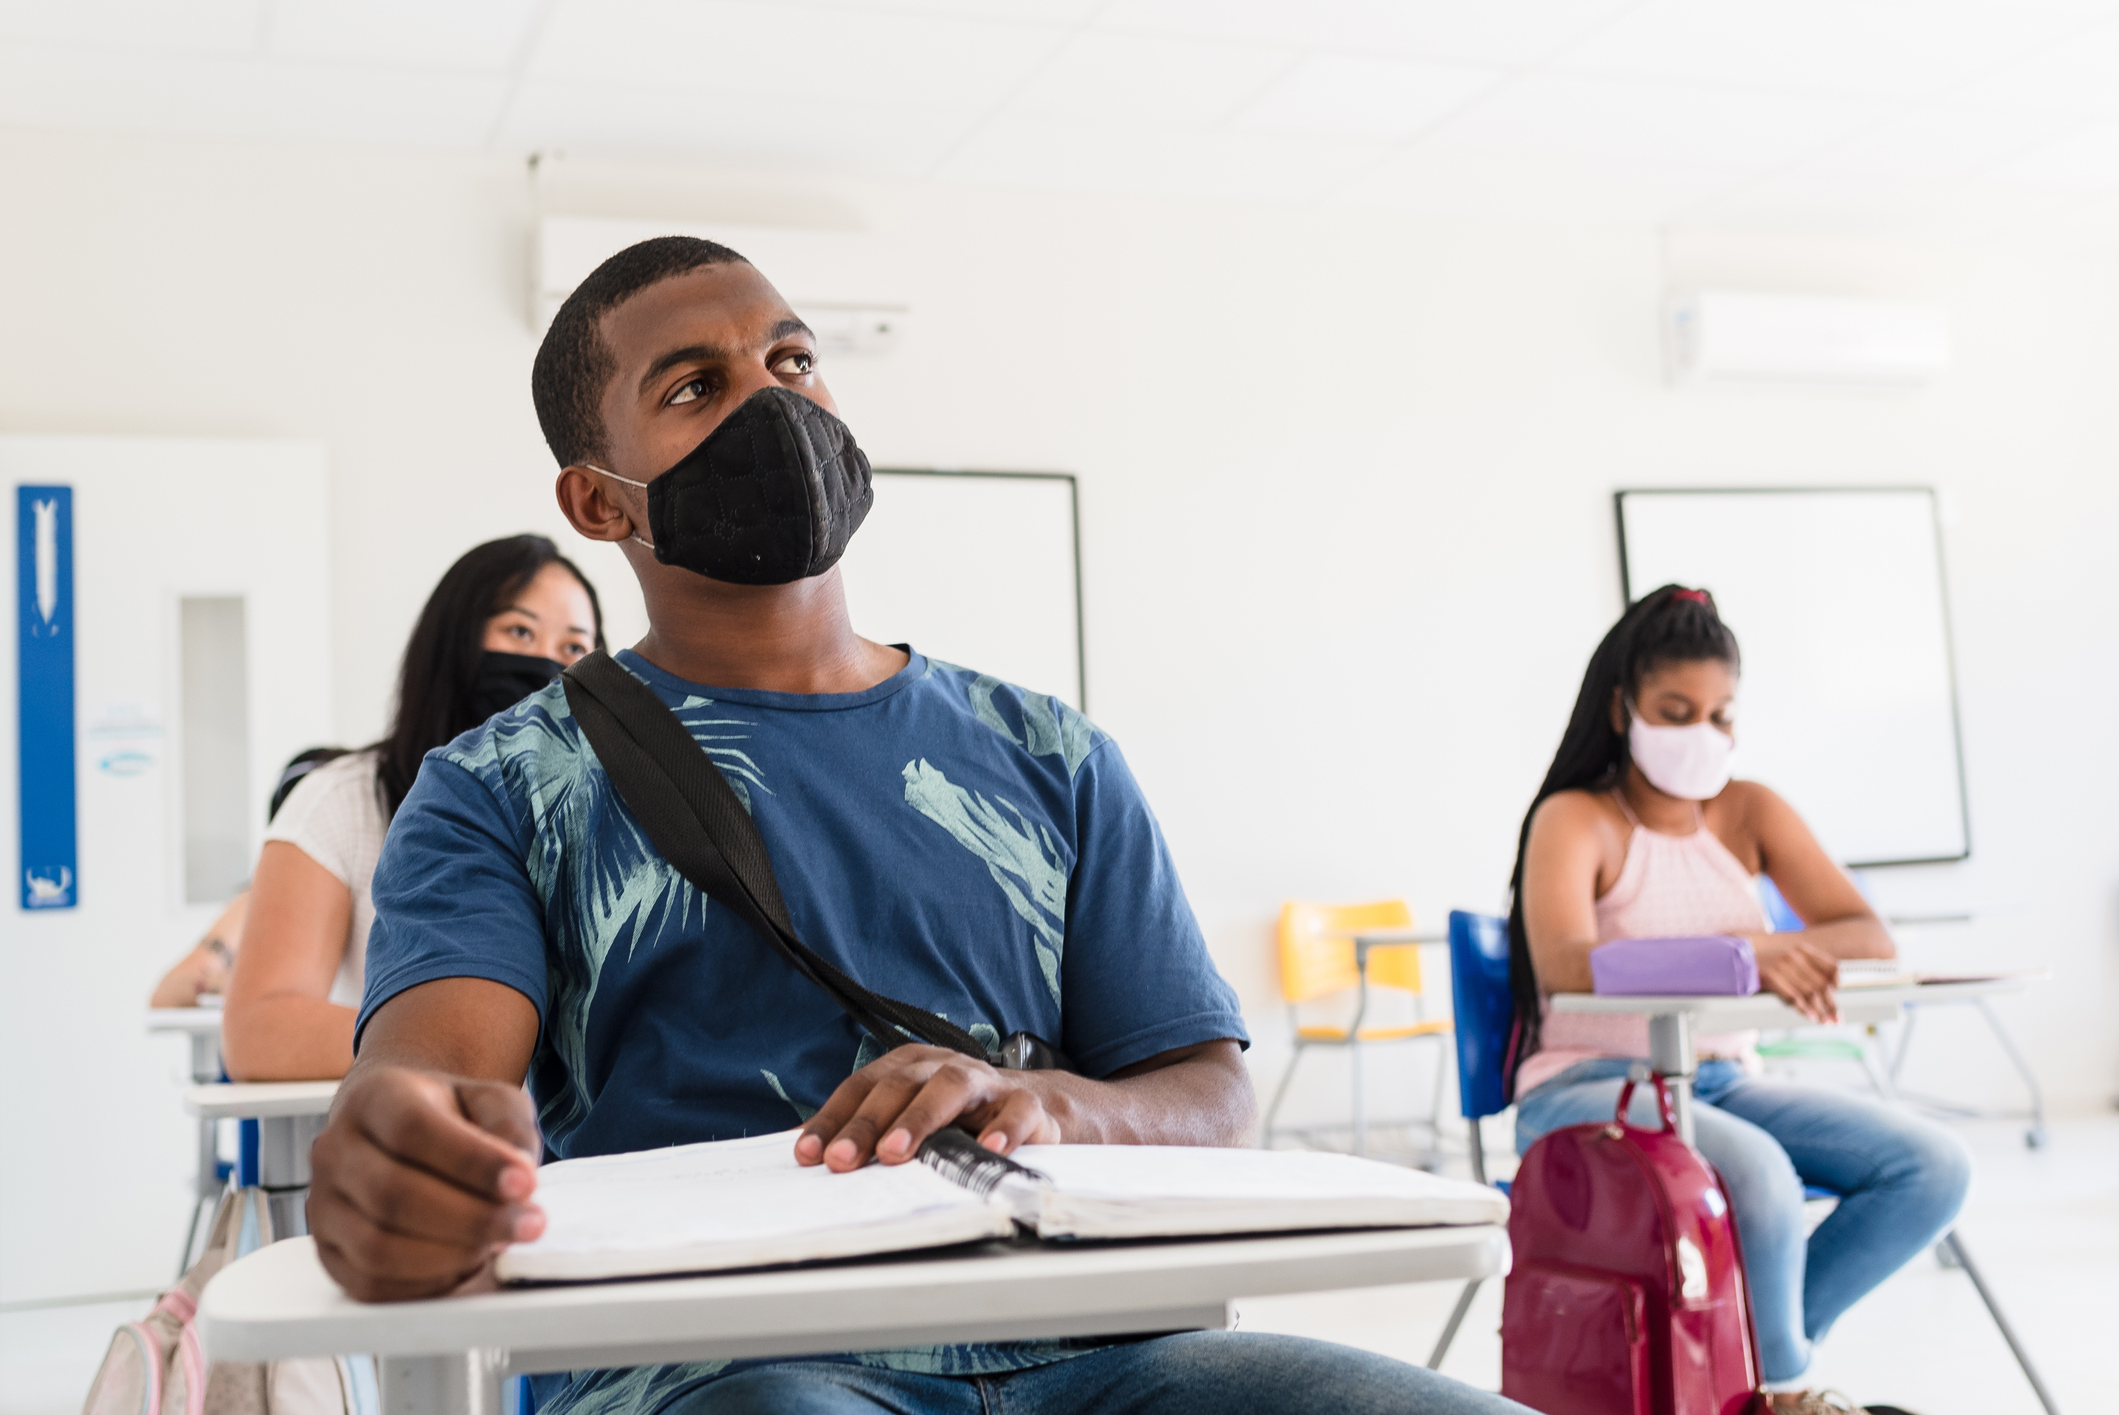 Students wearing protective mask in the classroom